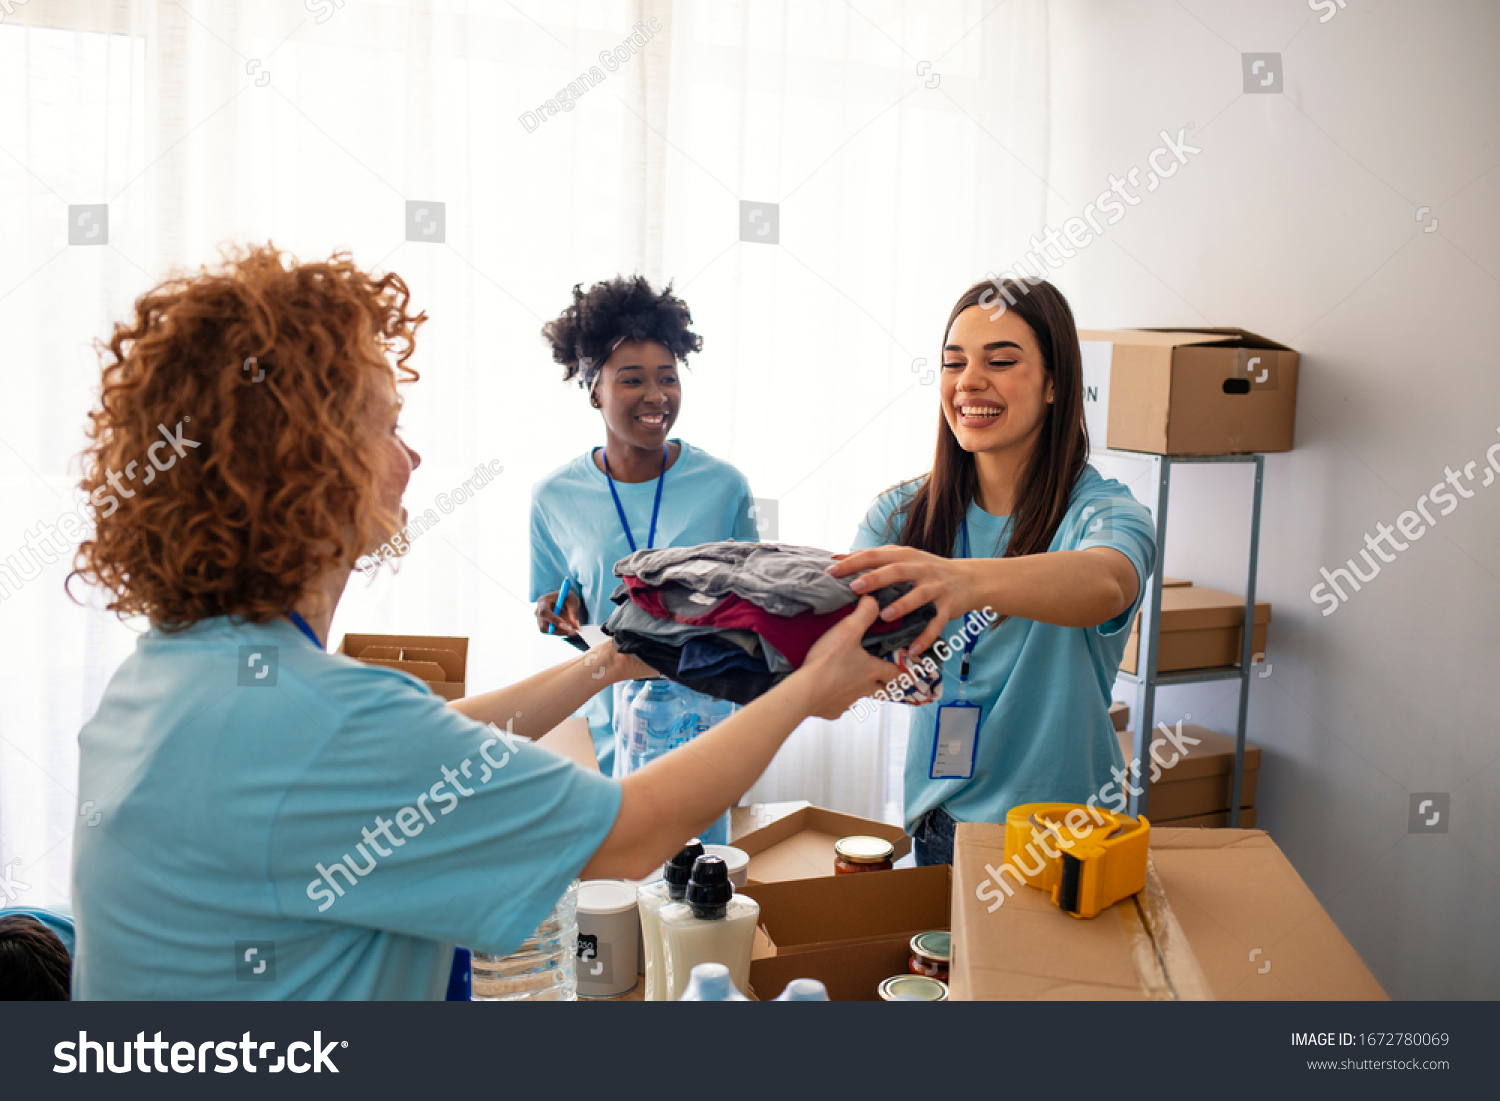 Volunteers Collecting Food Donations In Warehouse. Team of volunteers holding donations boxes in a large warehouse. Volunteers putting clothes in donation boxes, social worker making notes charity #1672780069